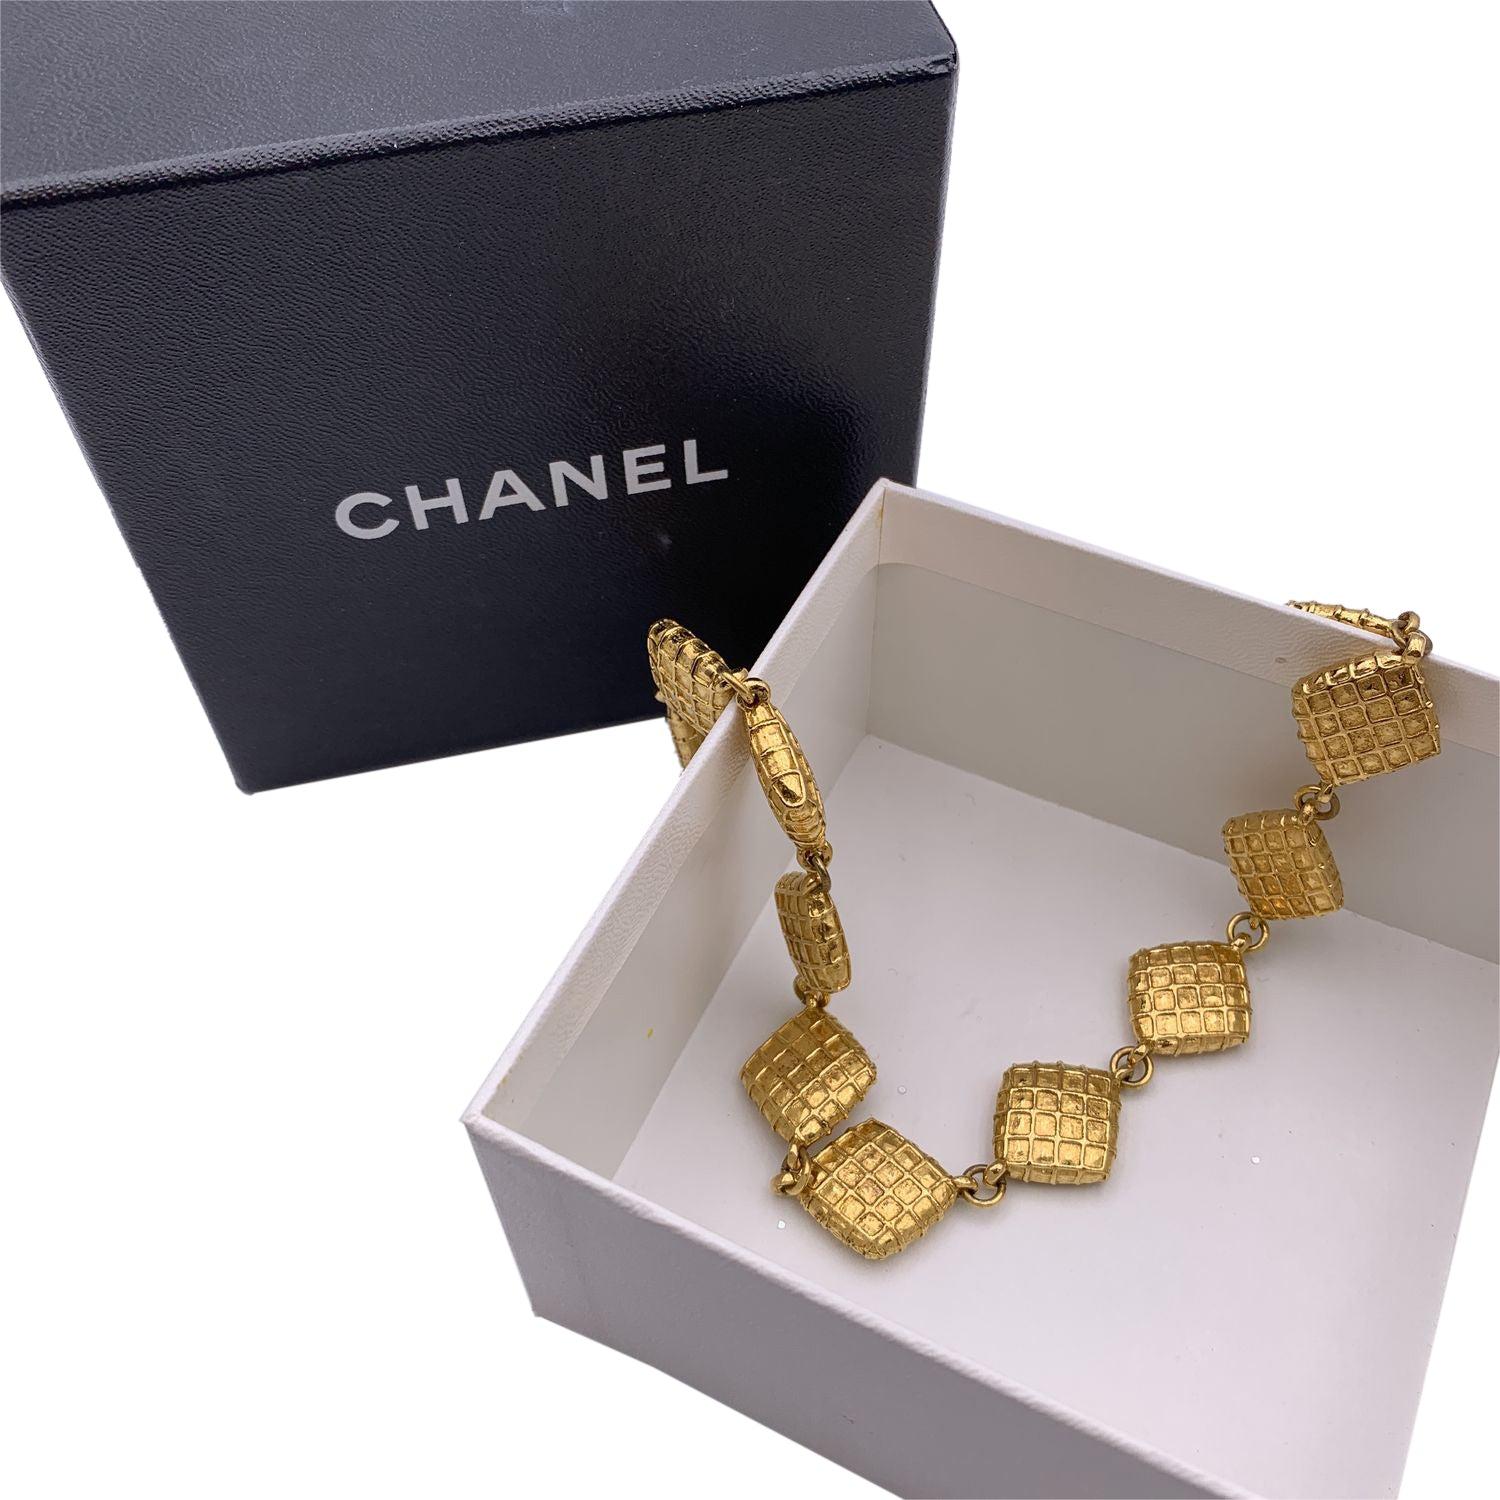 Vintage gold metal chain necklace from CHANEL. It features diamond-shaped elements with quilted pattern Spring ring closure. Total length: 15.5 inches - 39.4 cm. 'CHANEL - CC - Made in France' round tab Condition A - EXCELLENT Gently used. Please,